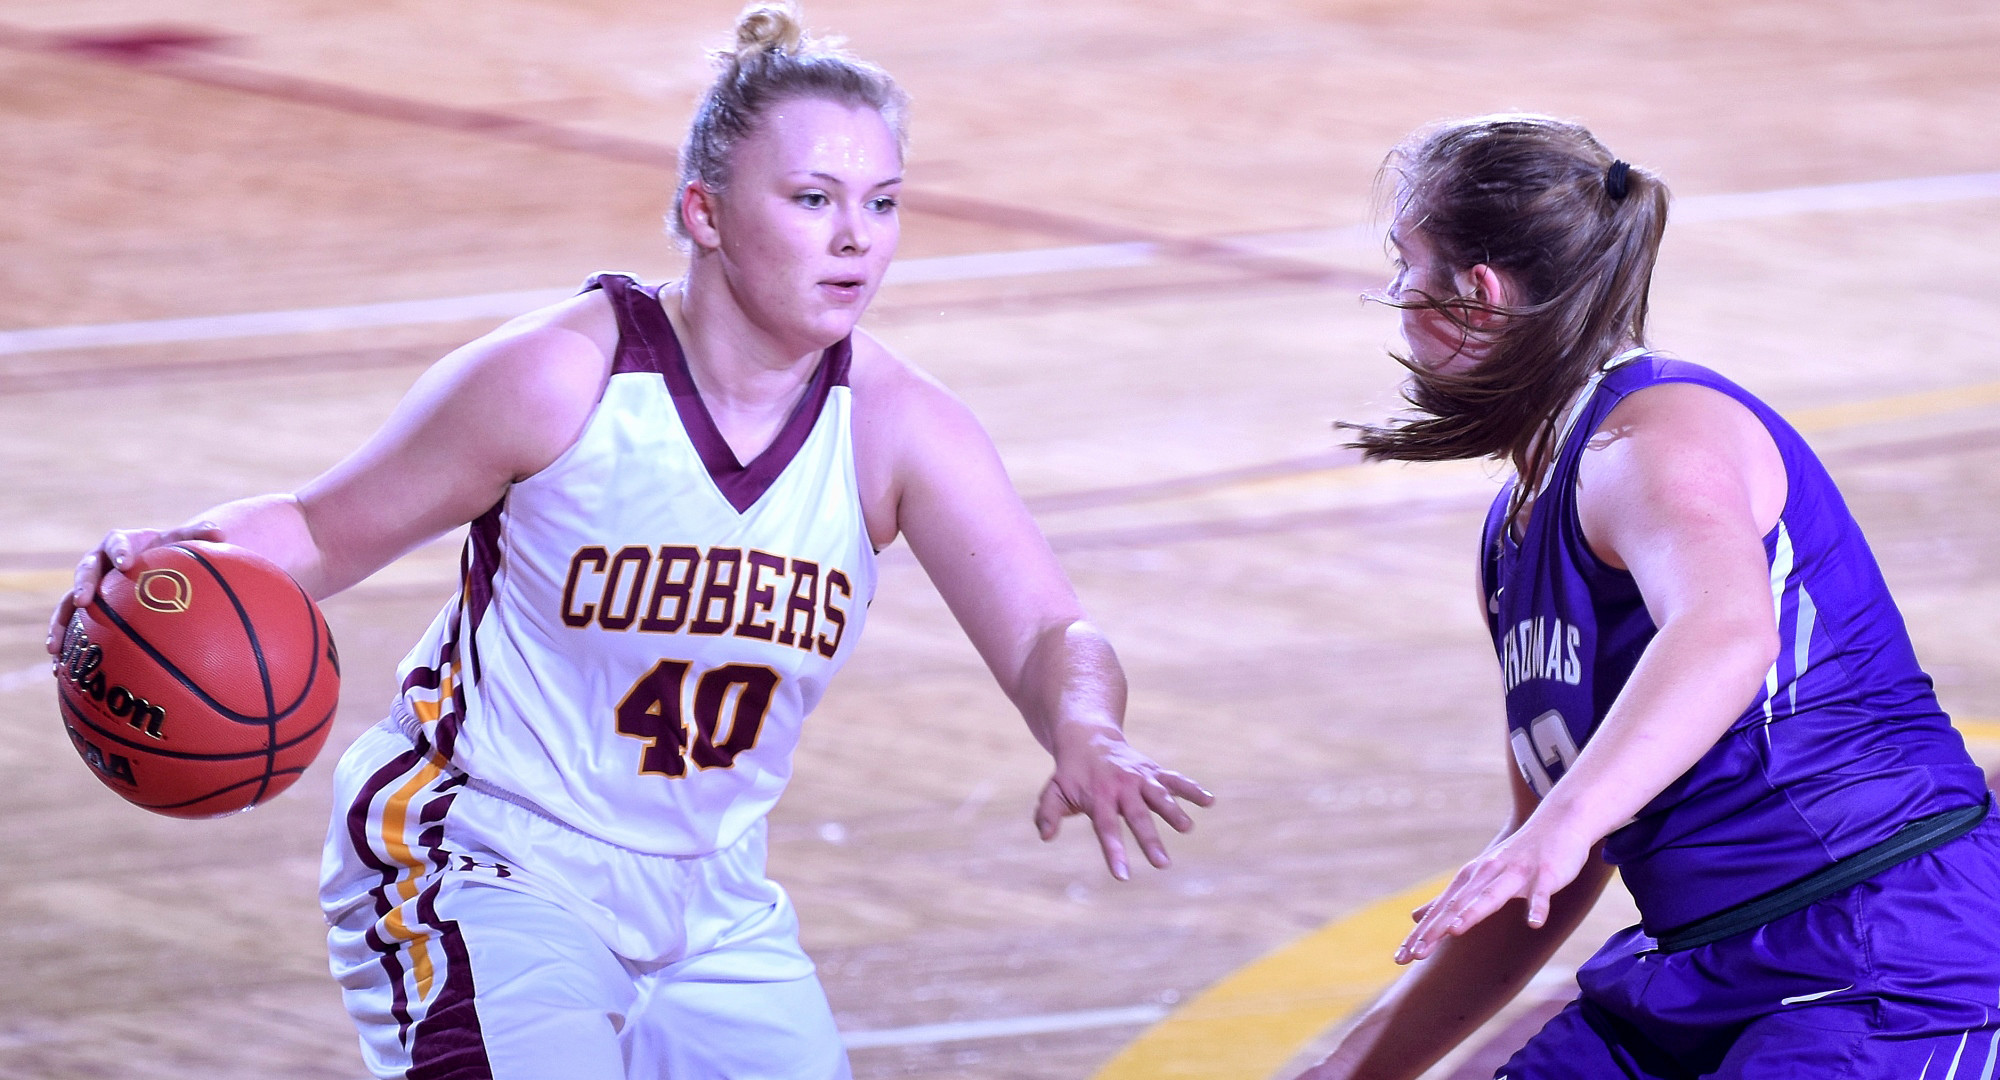 Junior Mira Ellefson finished with a team-high 16 points and made two of the Cobbers' 14 straight free throws at the end of the team's 81-72 win at St. Olaf.